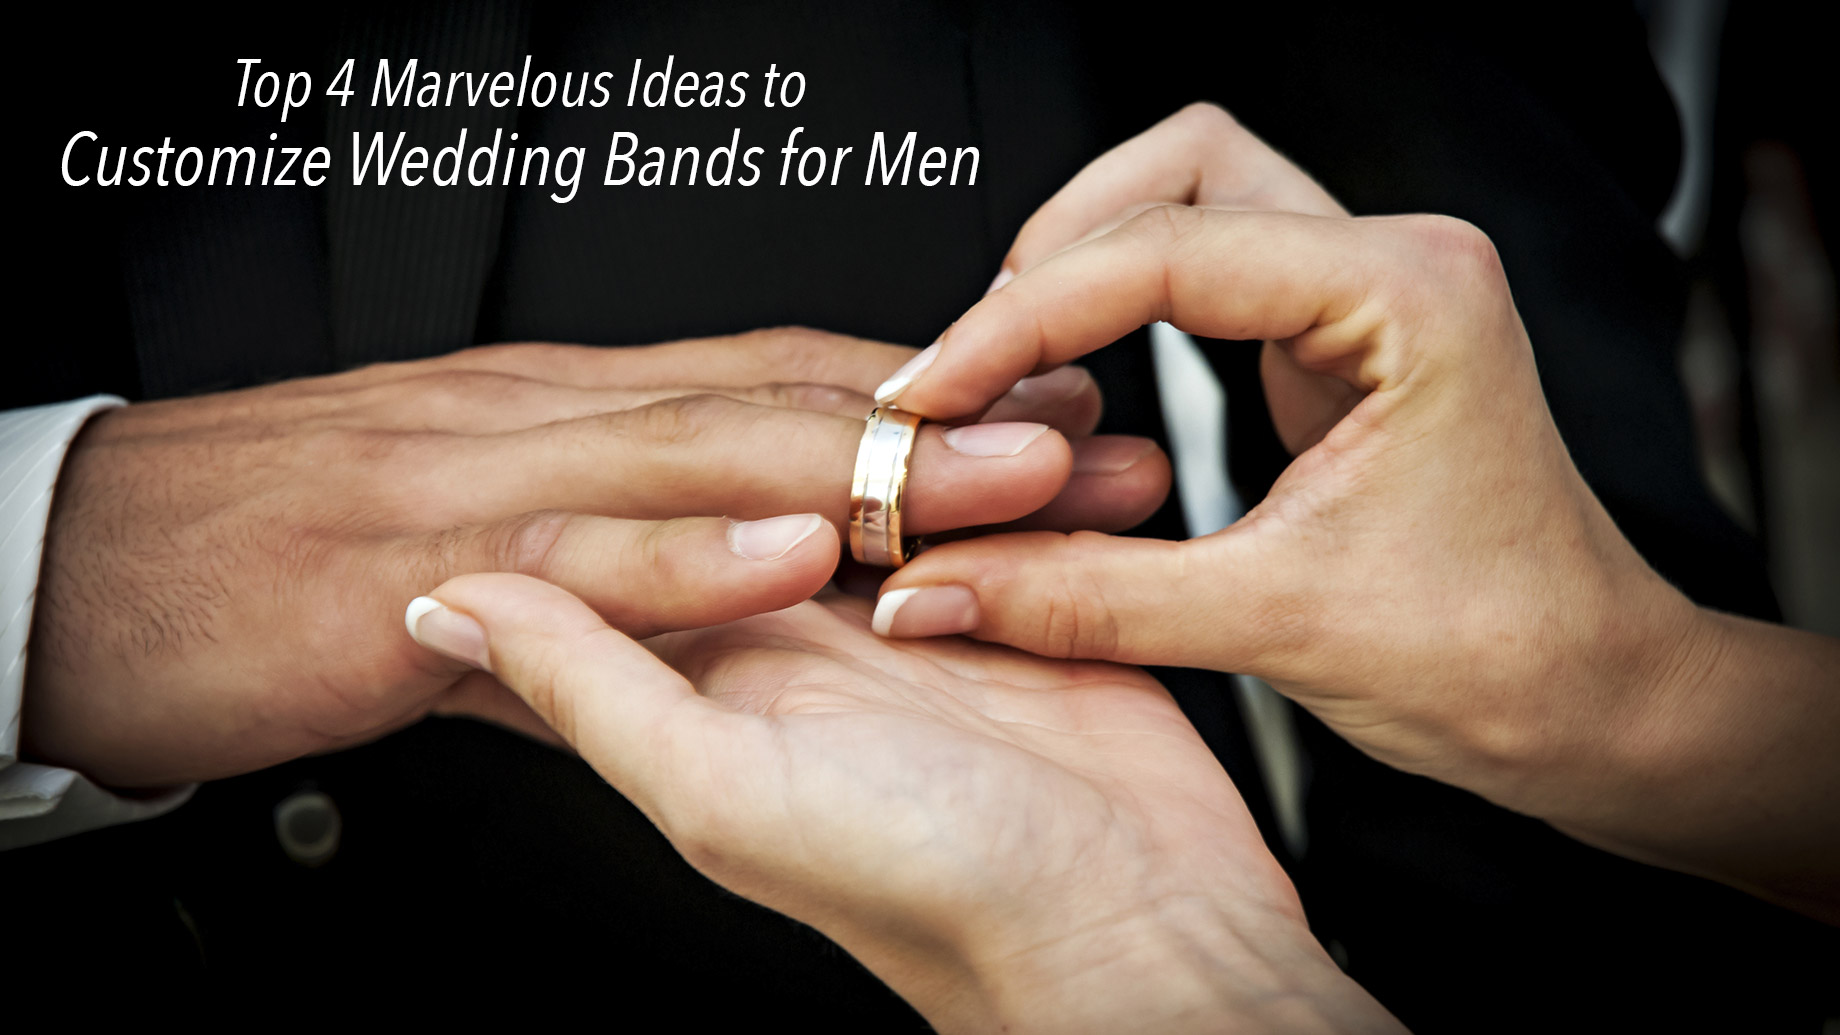 Top 4 Marvelous Ideas to Customize Wedding Bands for Men